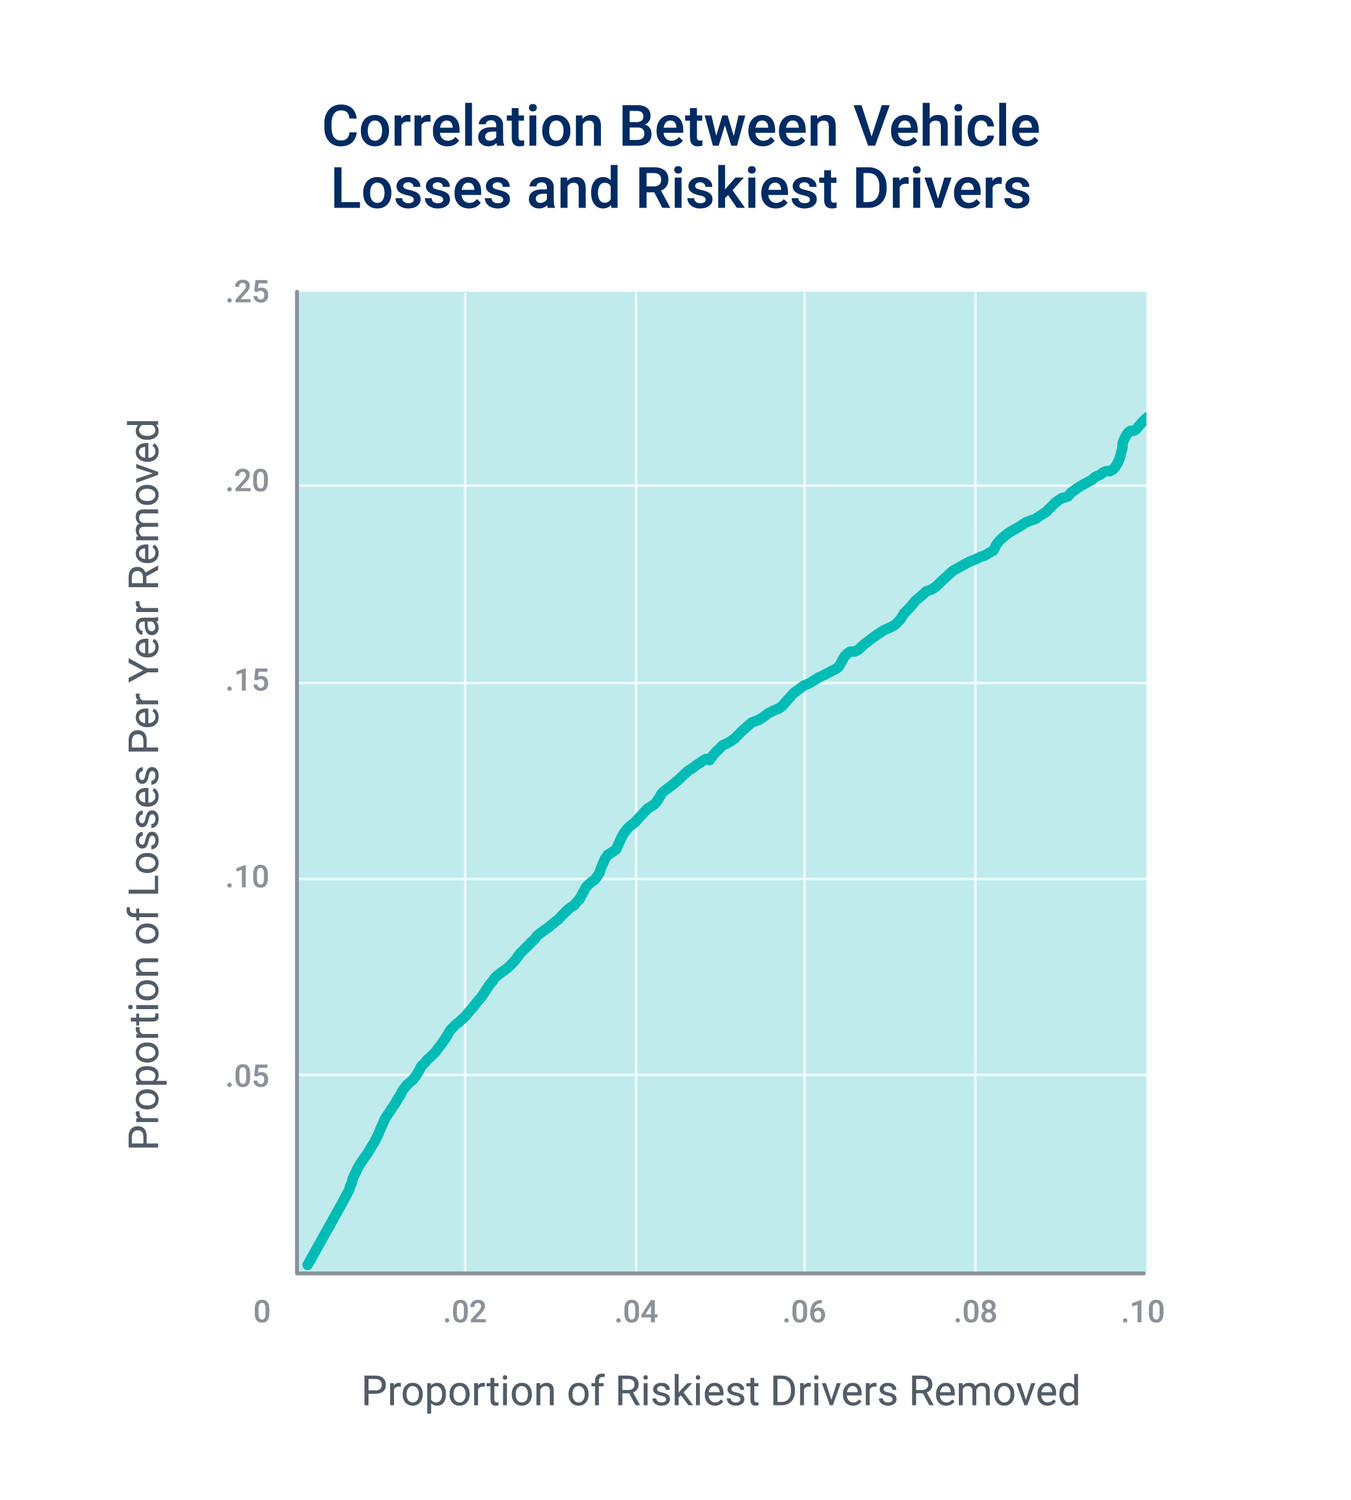 Chart: Correlation between vehicle losses and riskiest drivers. Chart shows proportion of losses per year removed rise from 0 to over .20 while proportion of riskiest drivers removed rises from 0 to .10 in a relatively linear progression